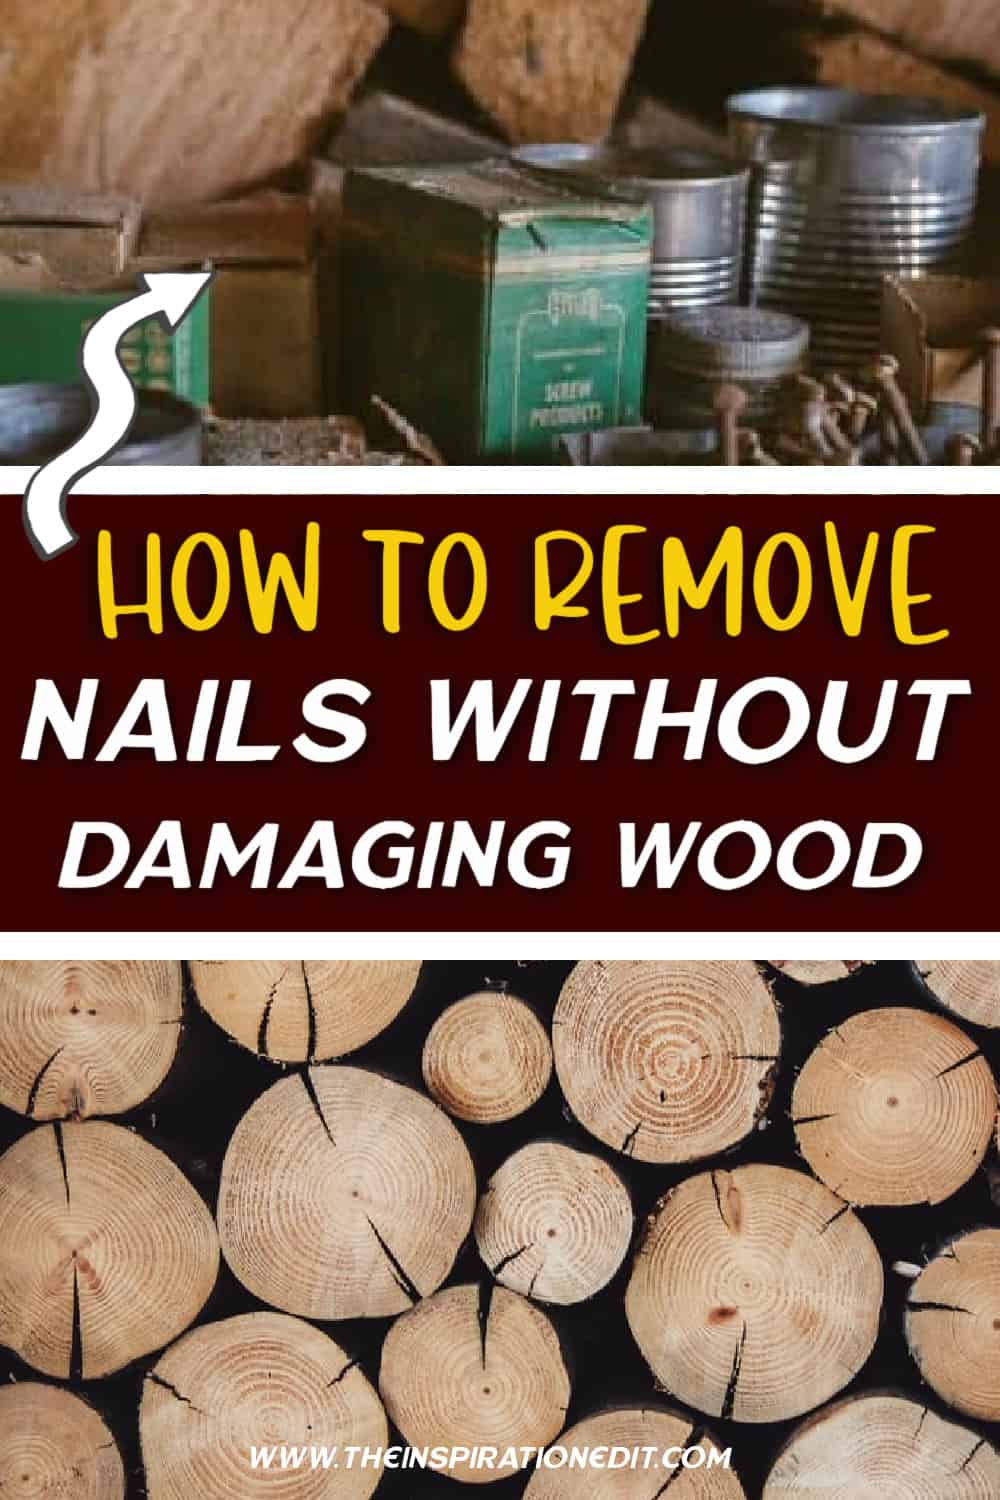 How Do You Remove Nails Without Damaging Wood · The Inspiration Edit